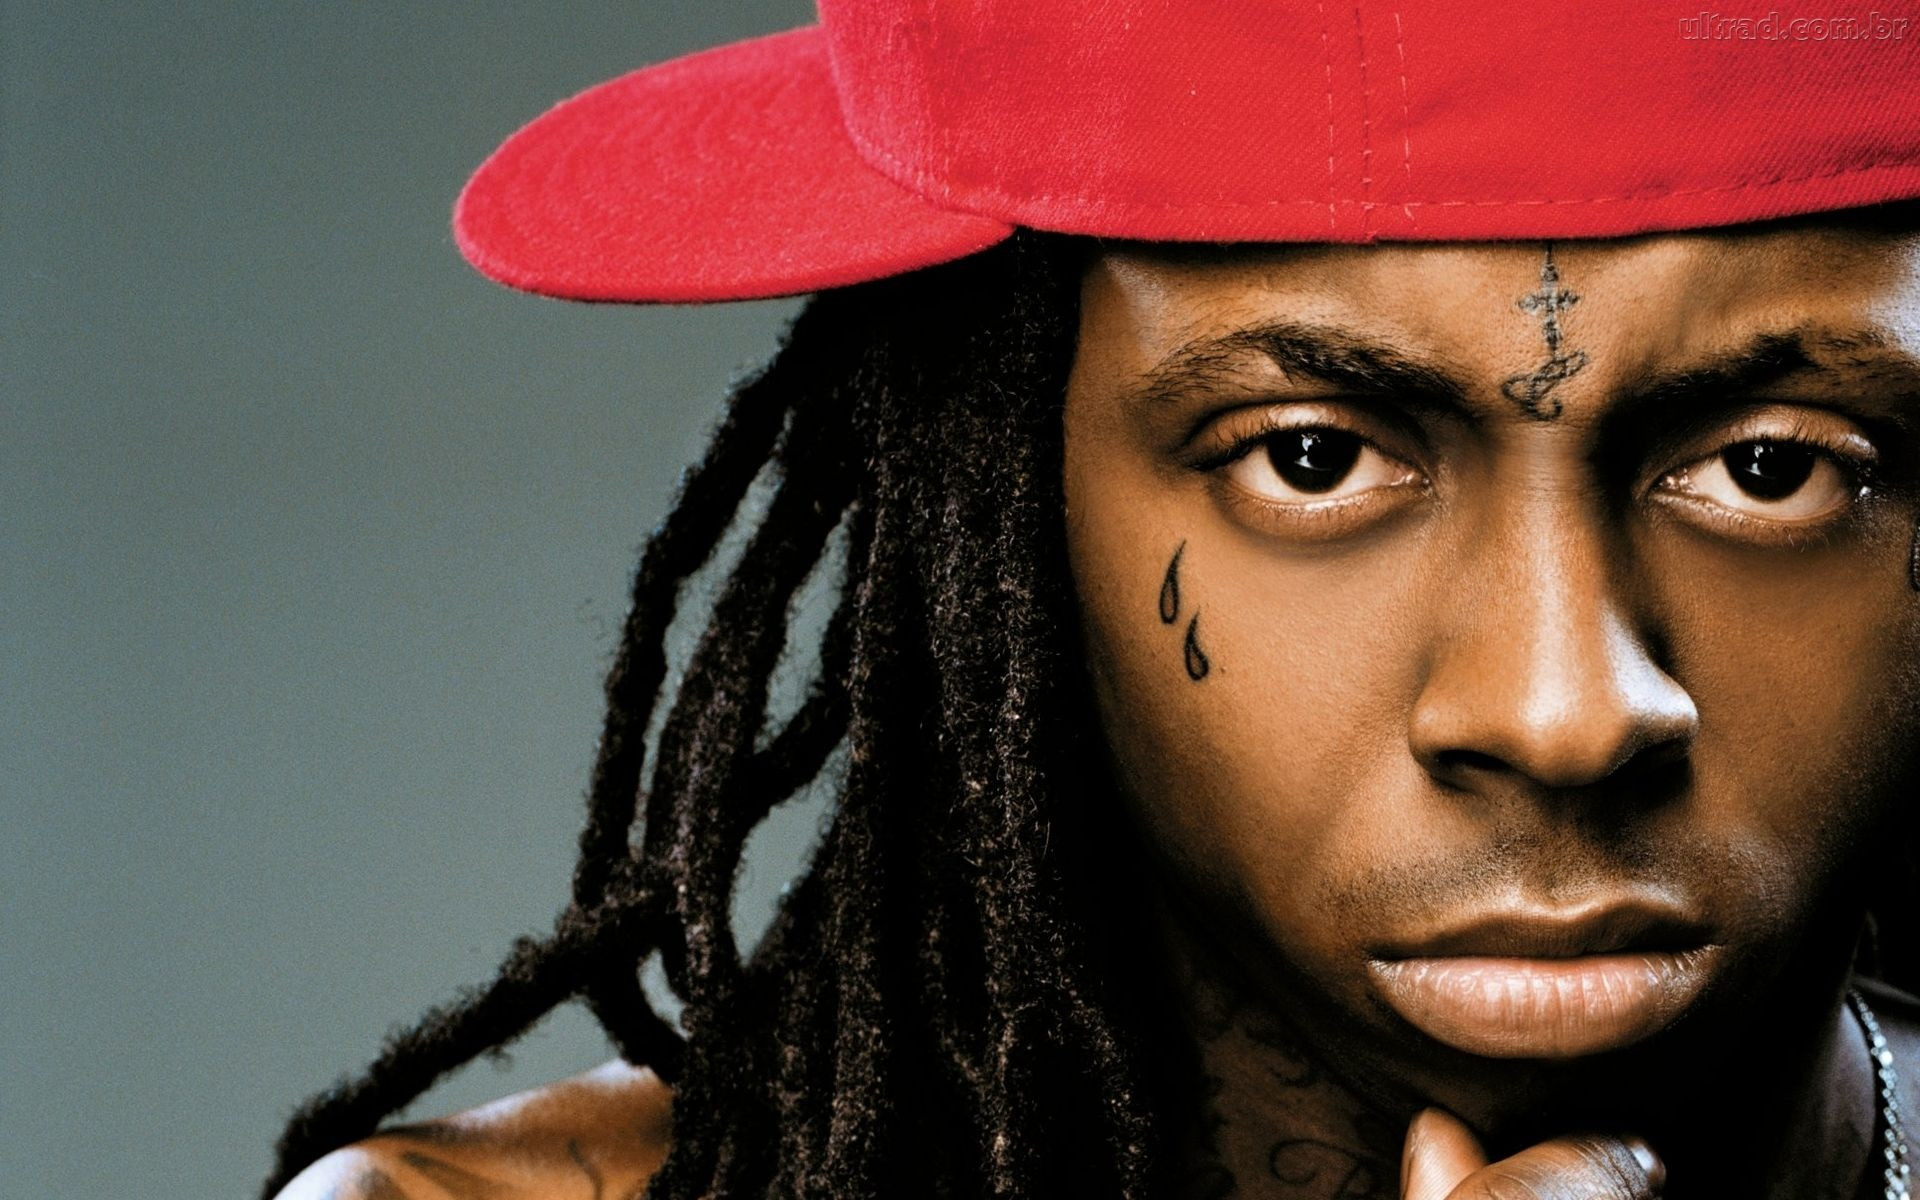 1486825 Lil Wayne wallpaper HD free wallpapers backgrounds images